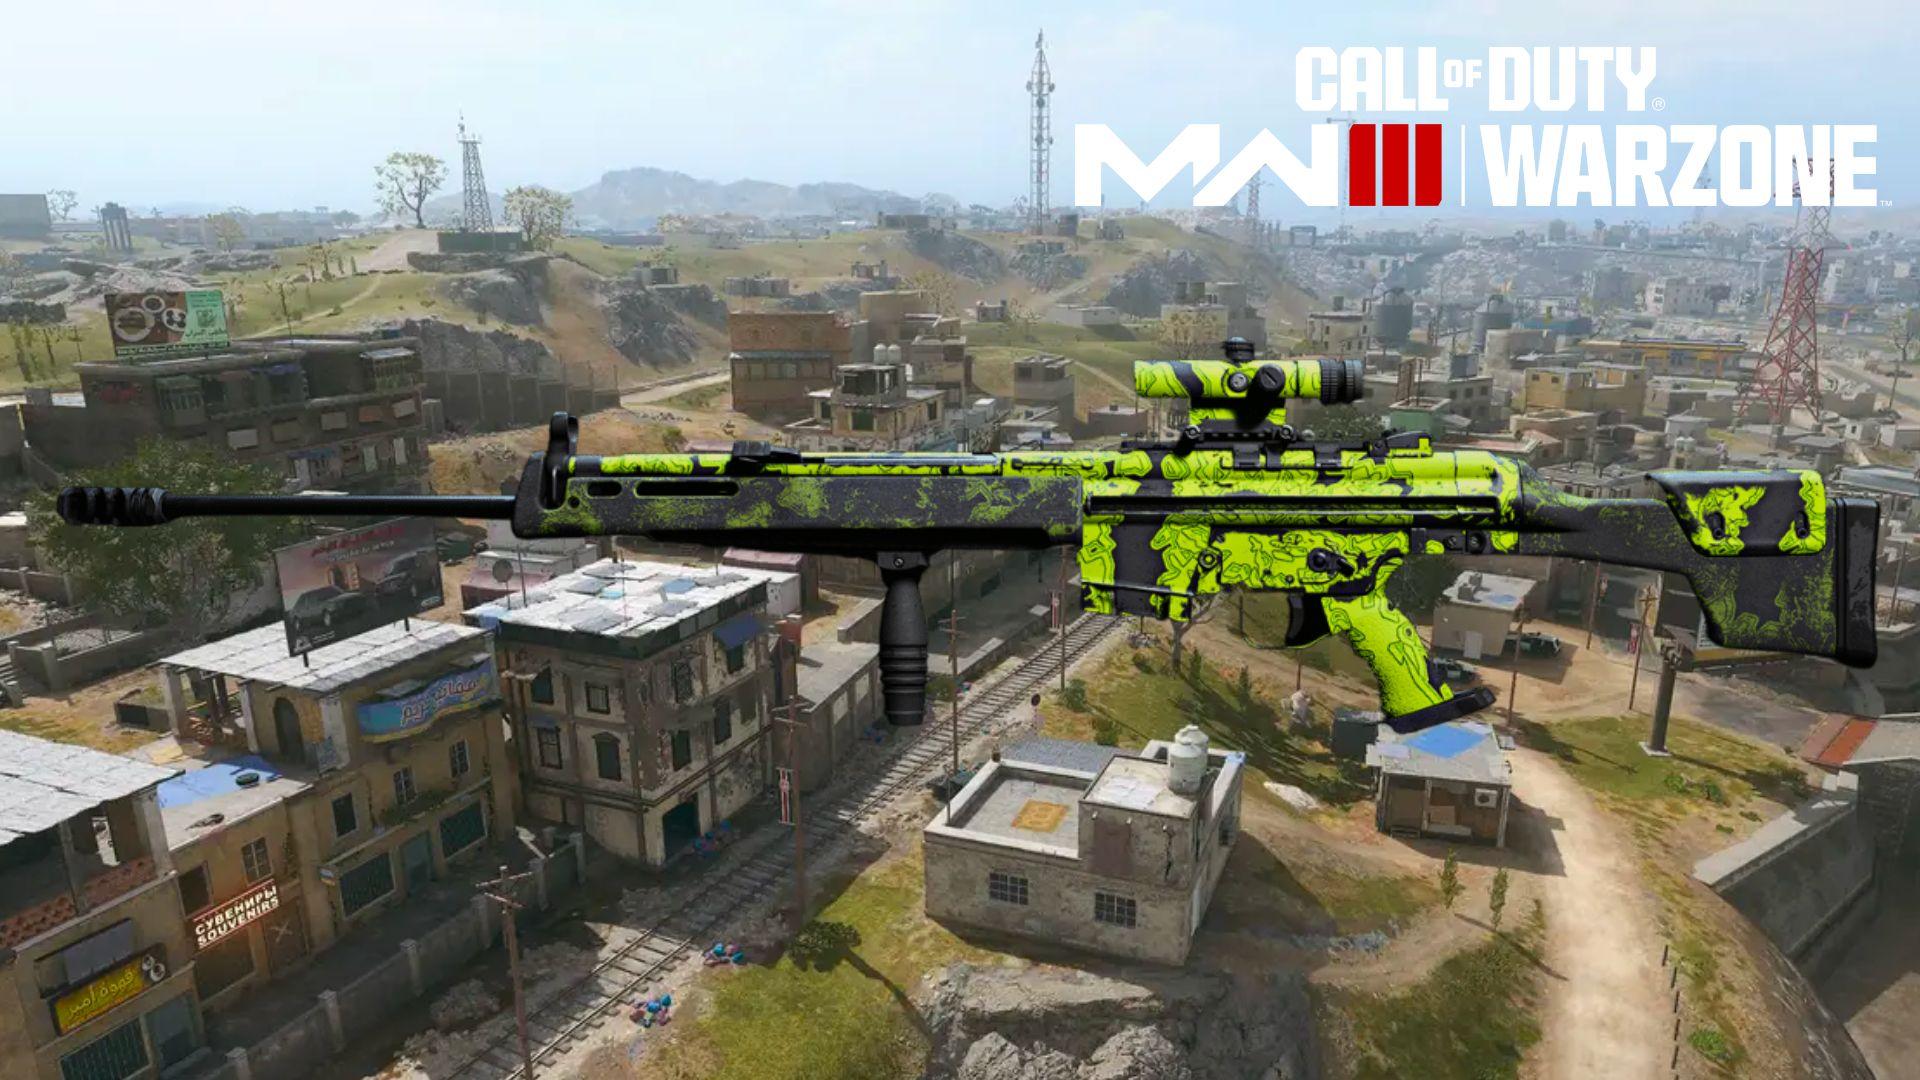 Green LM-S rifle in Warzone on Urzkistan map